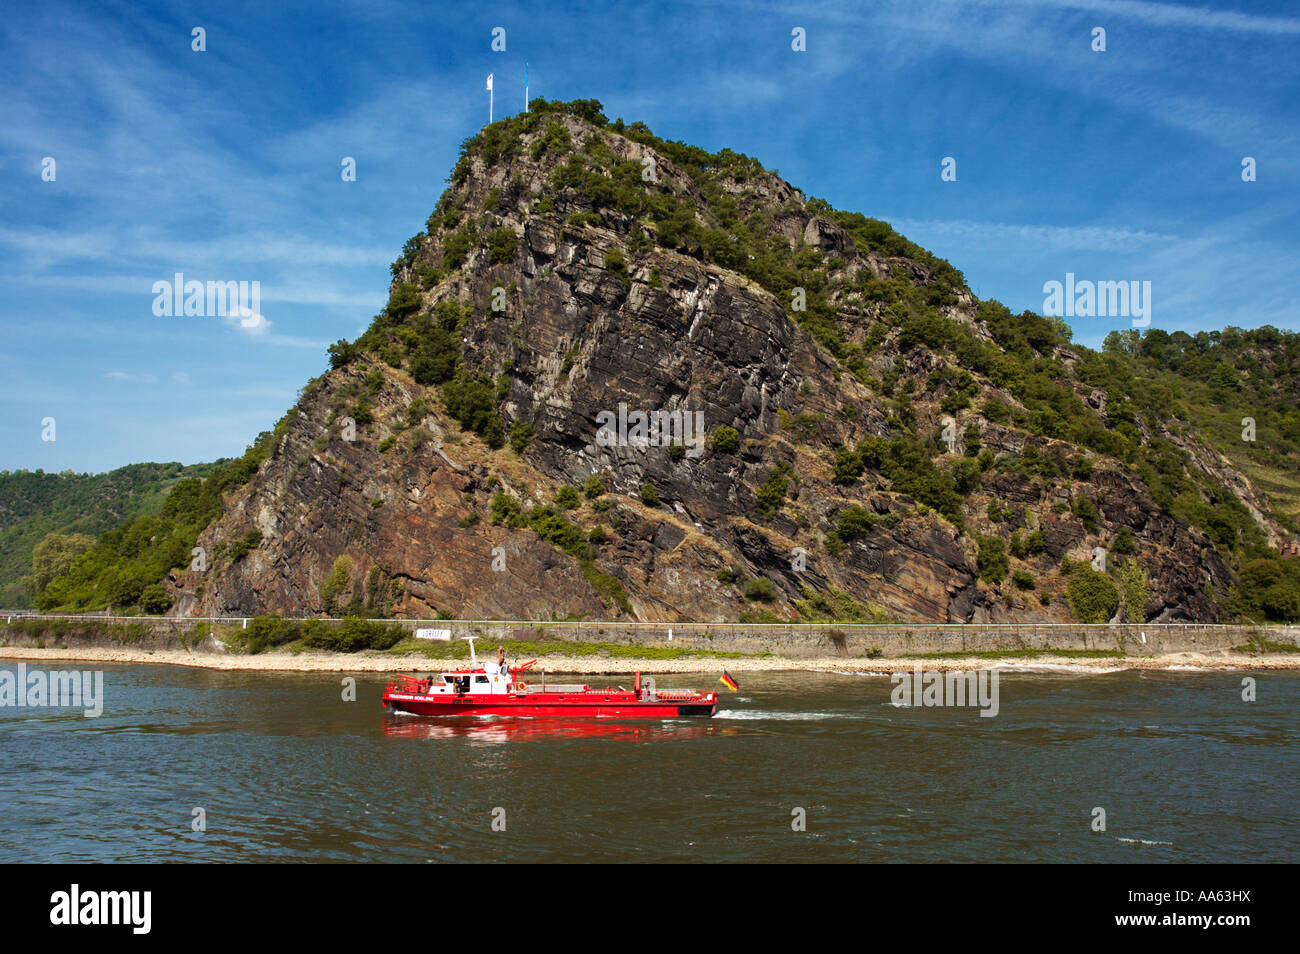 The Lorelei rock and fireboat in the River Rhine valley, Rhineland, Germany, Europe Stock Photo